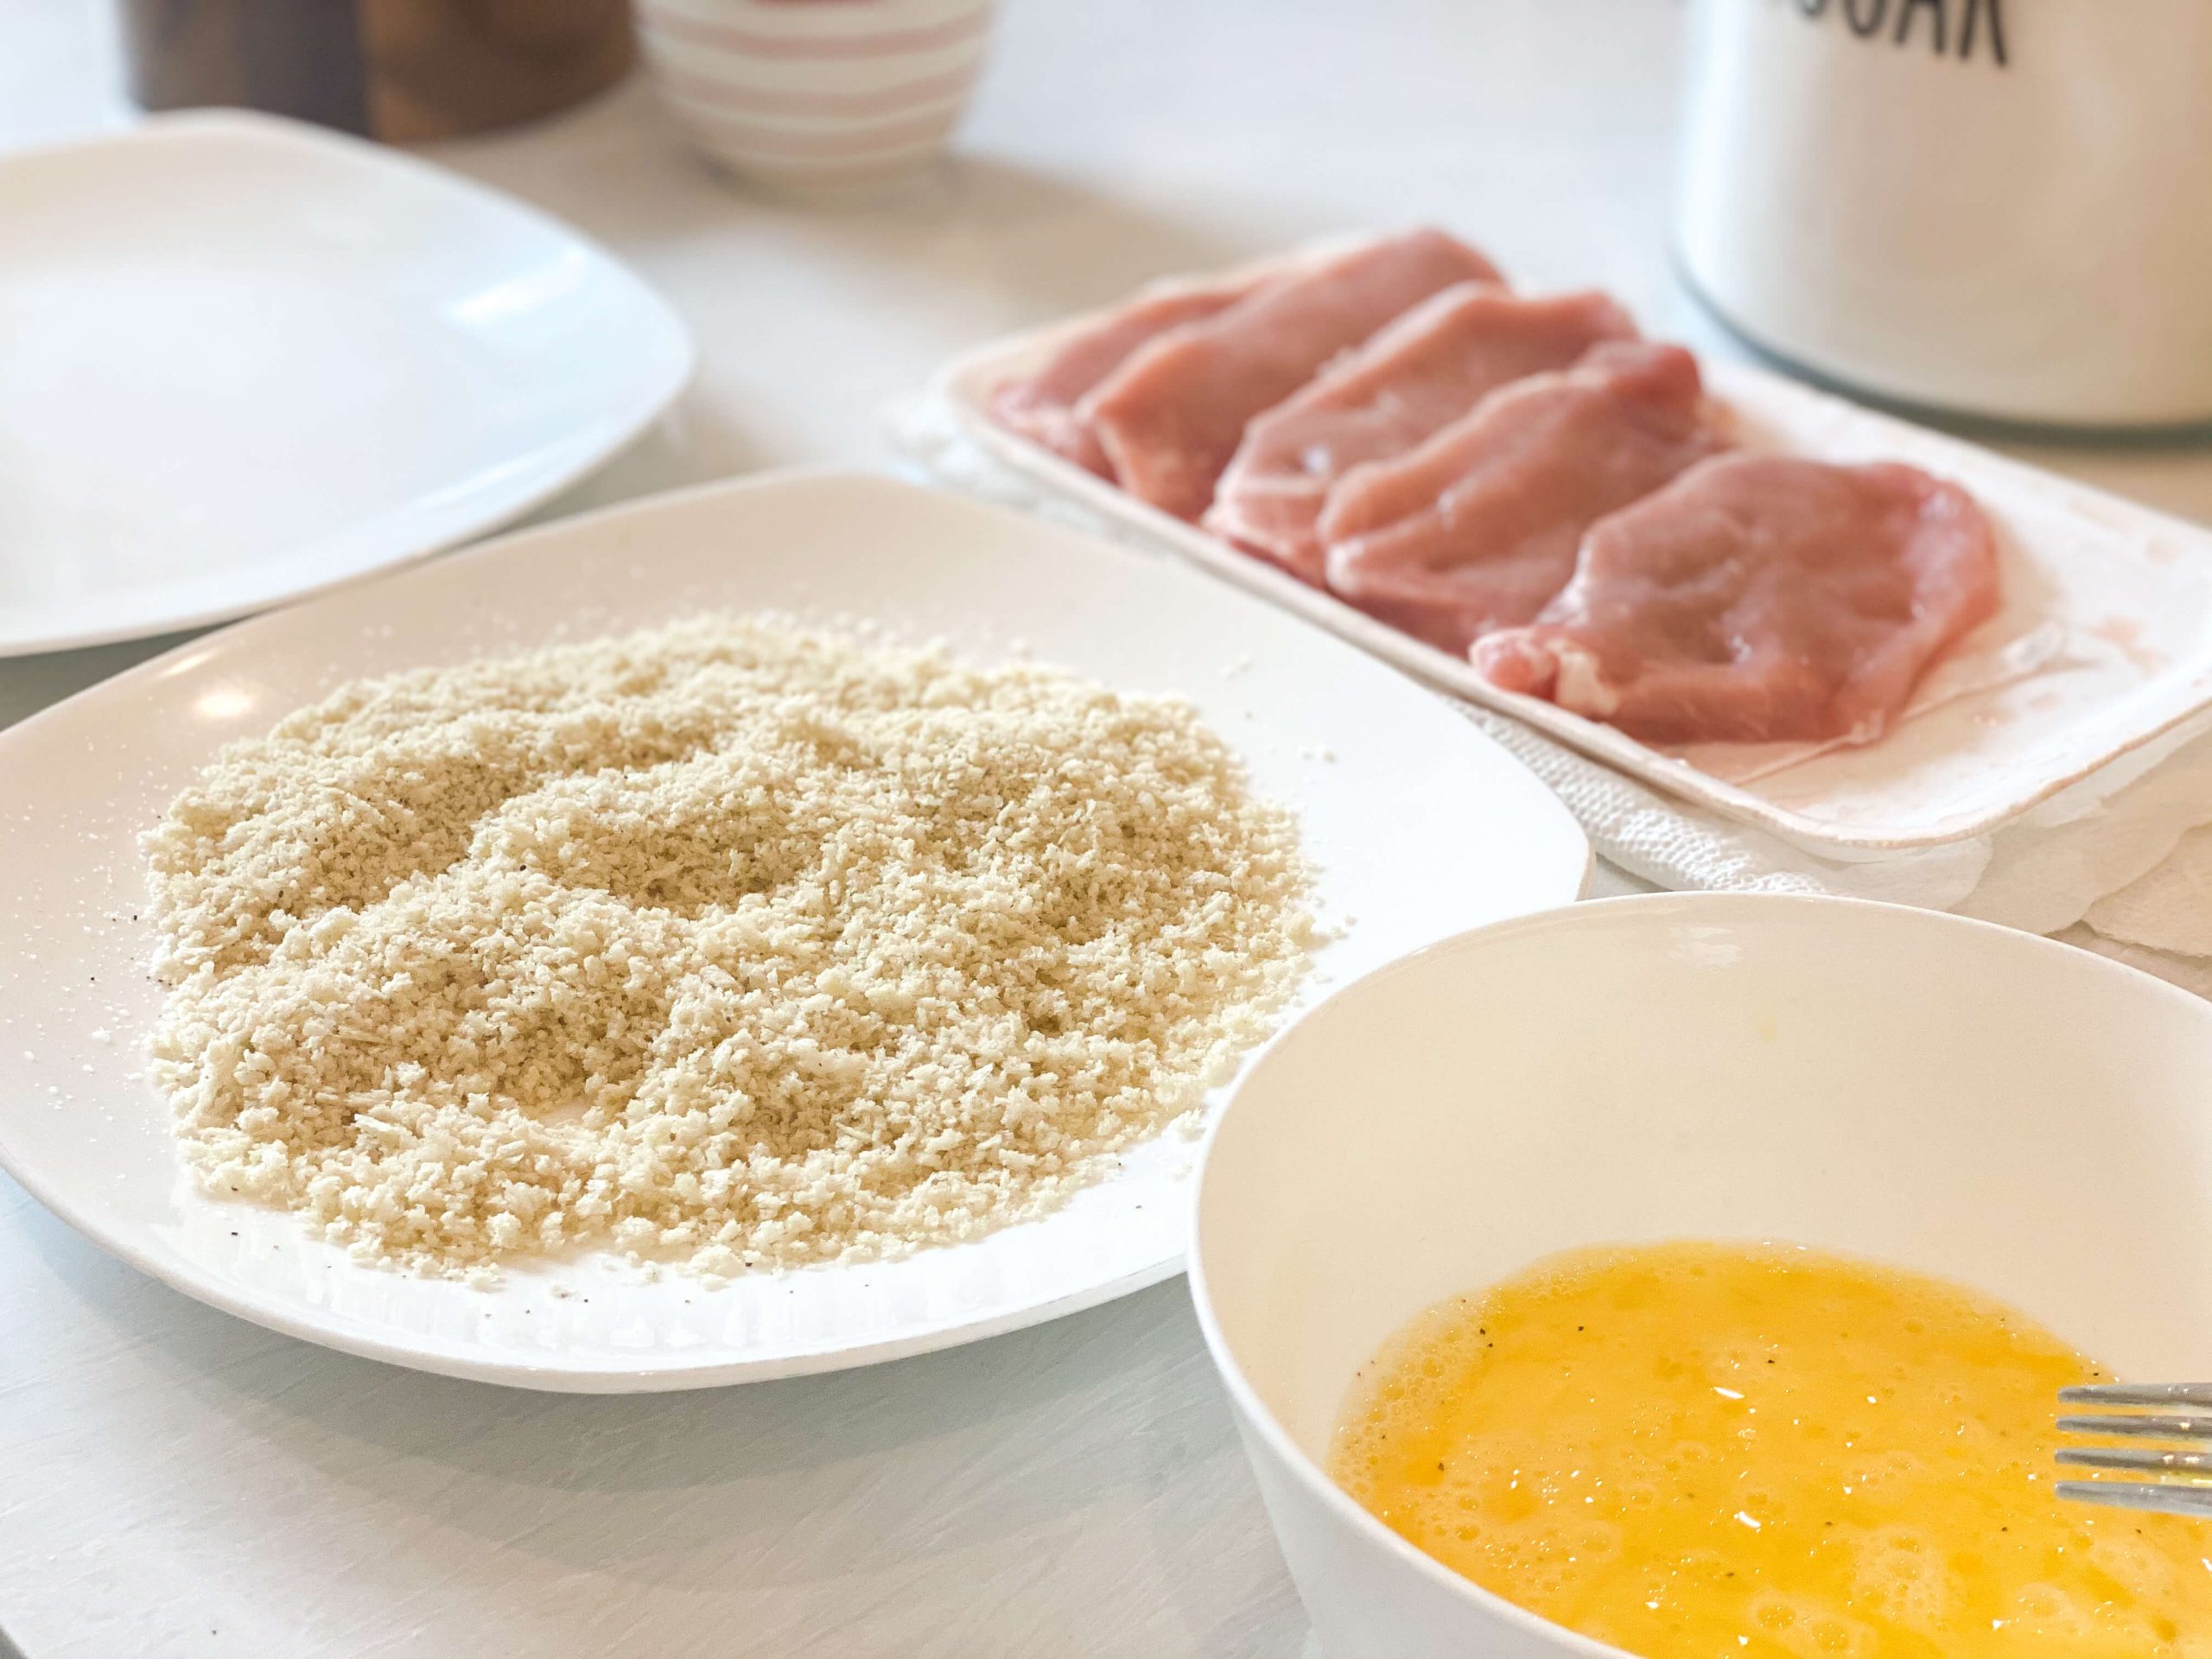 breading station for the pork chops. pano breadcrumbs, egg wash, 